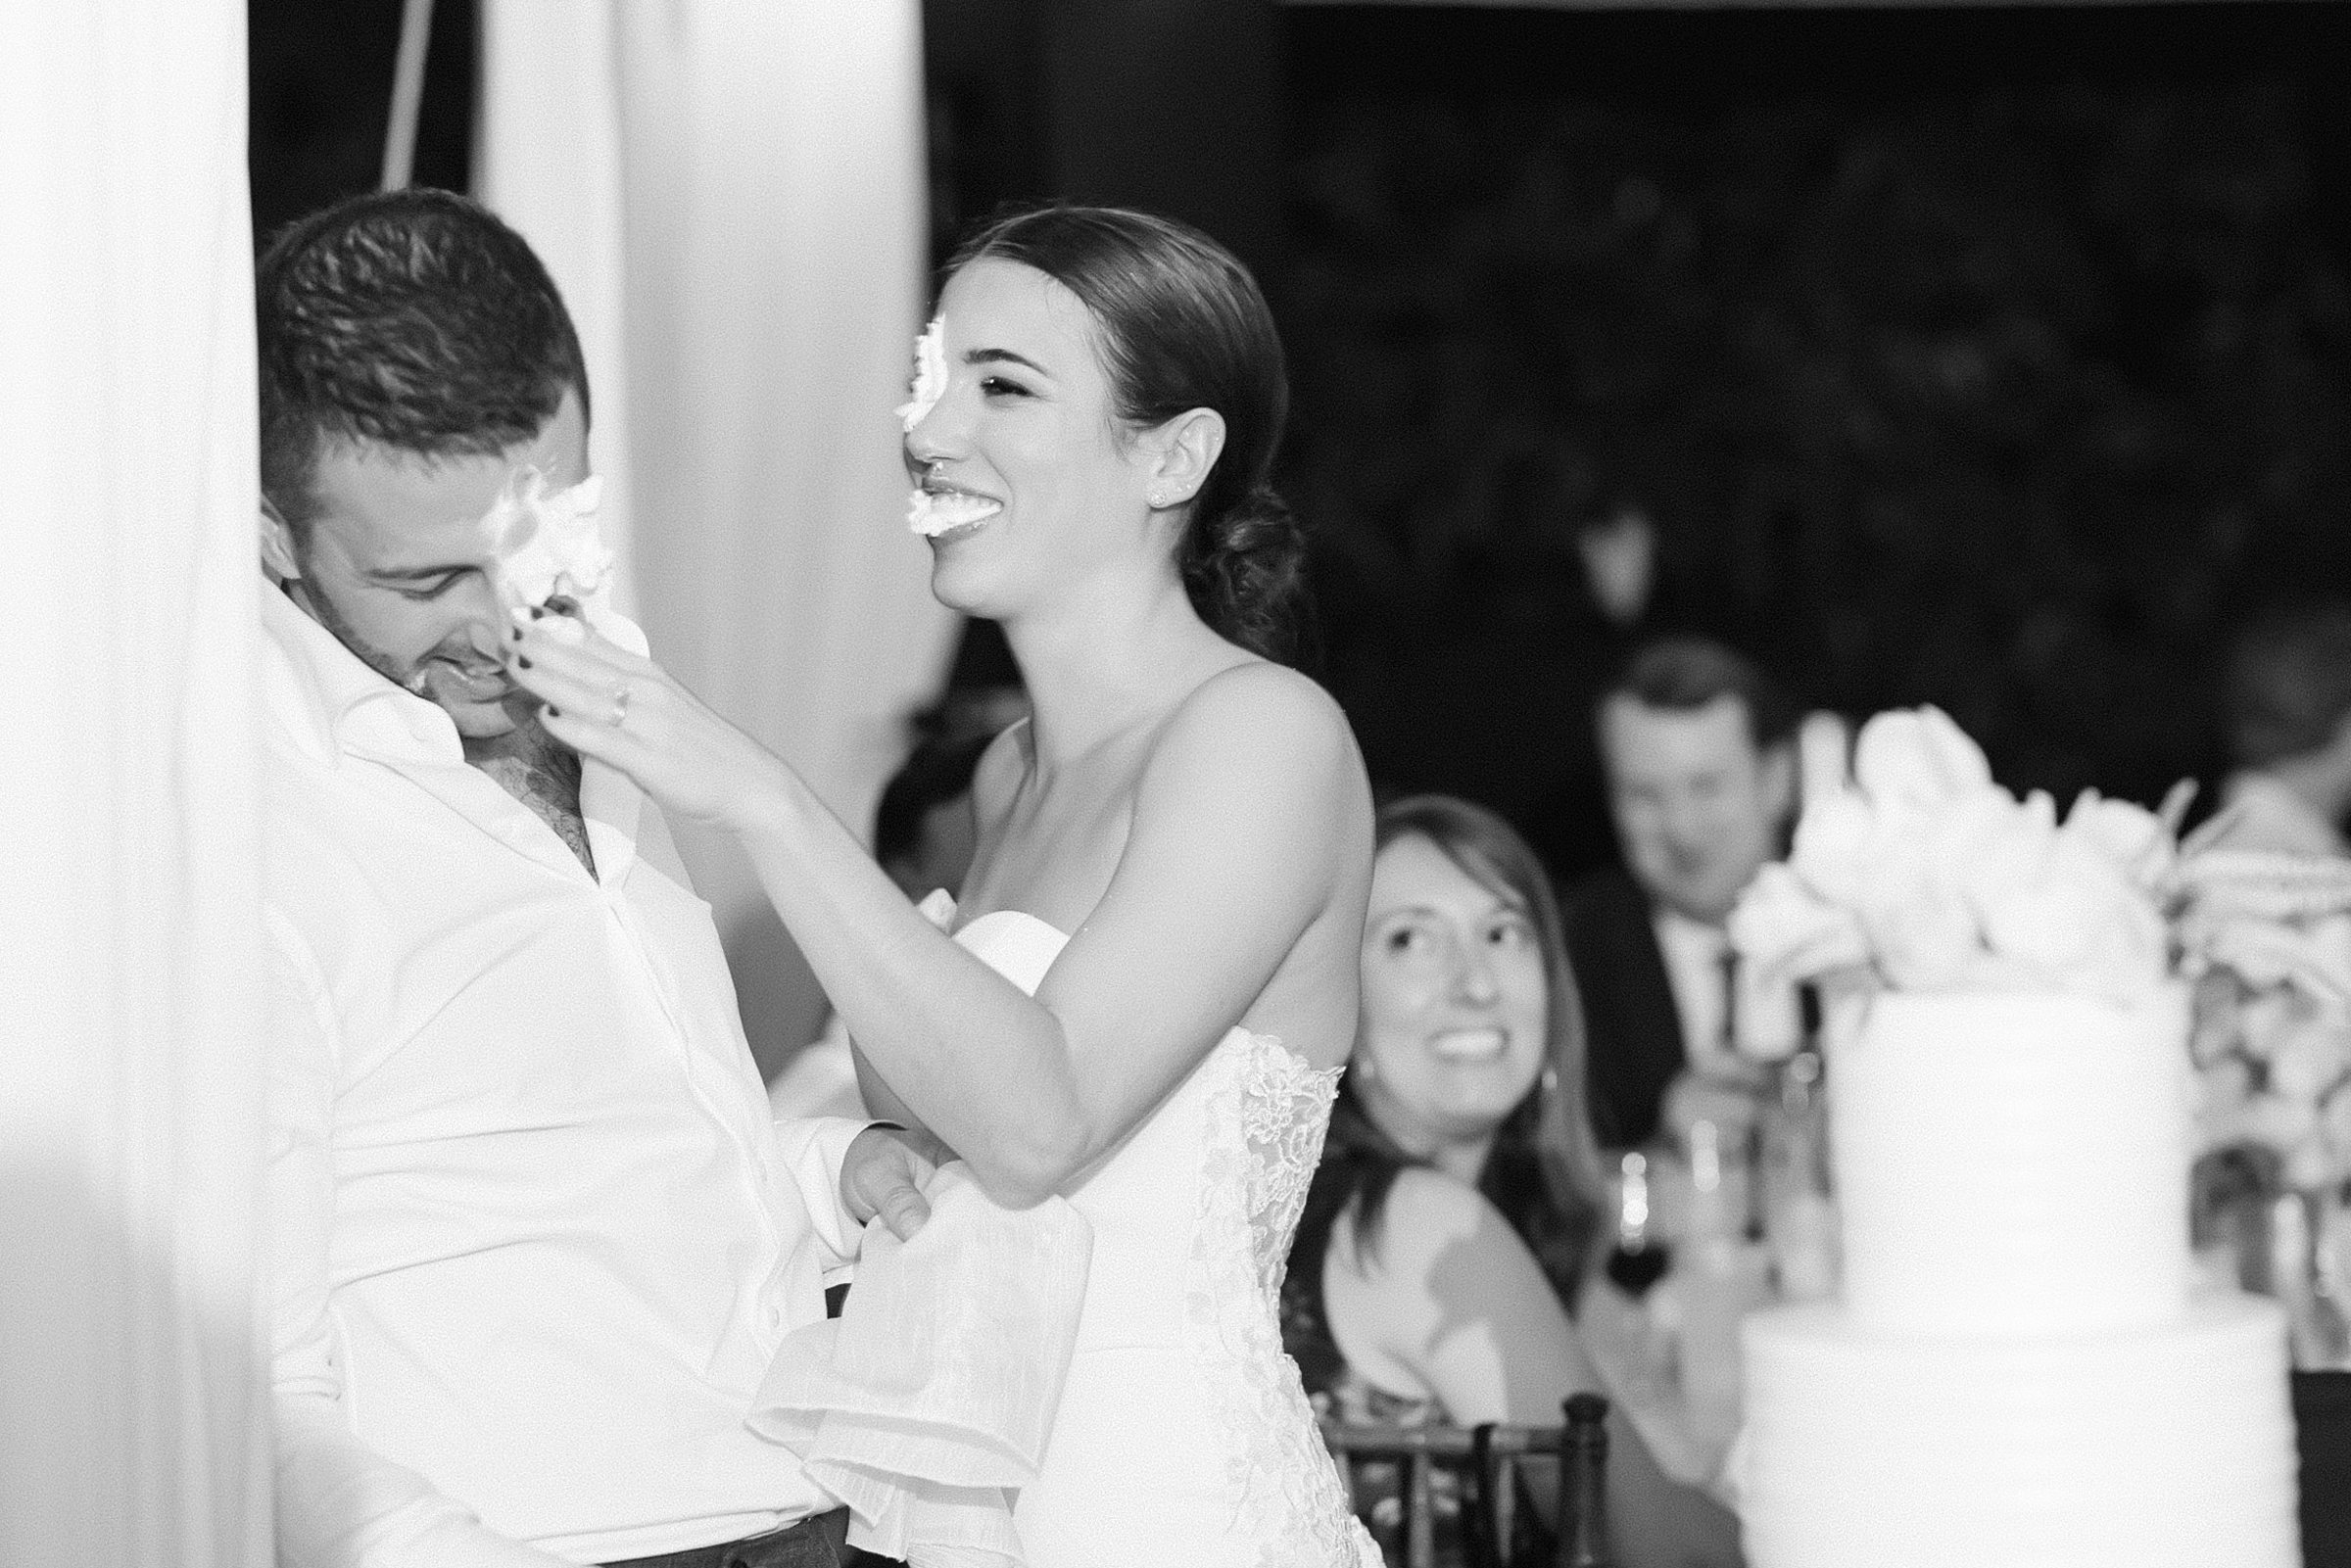 bride and groom have a whip cream fight at their cake cutting